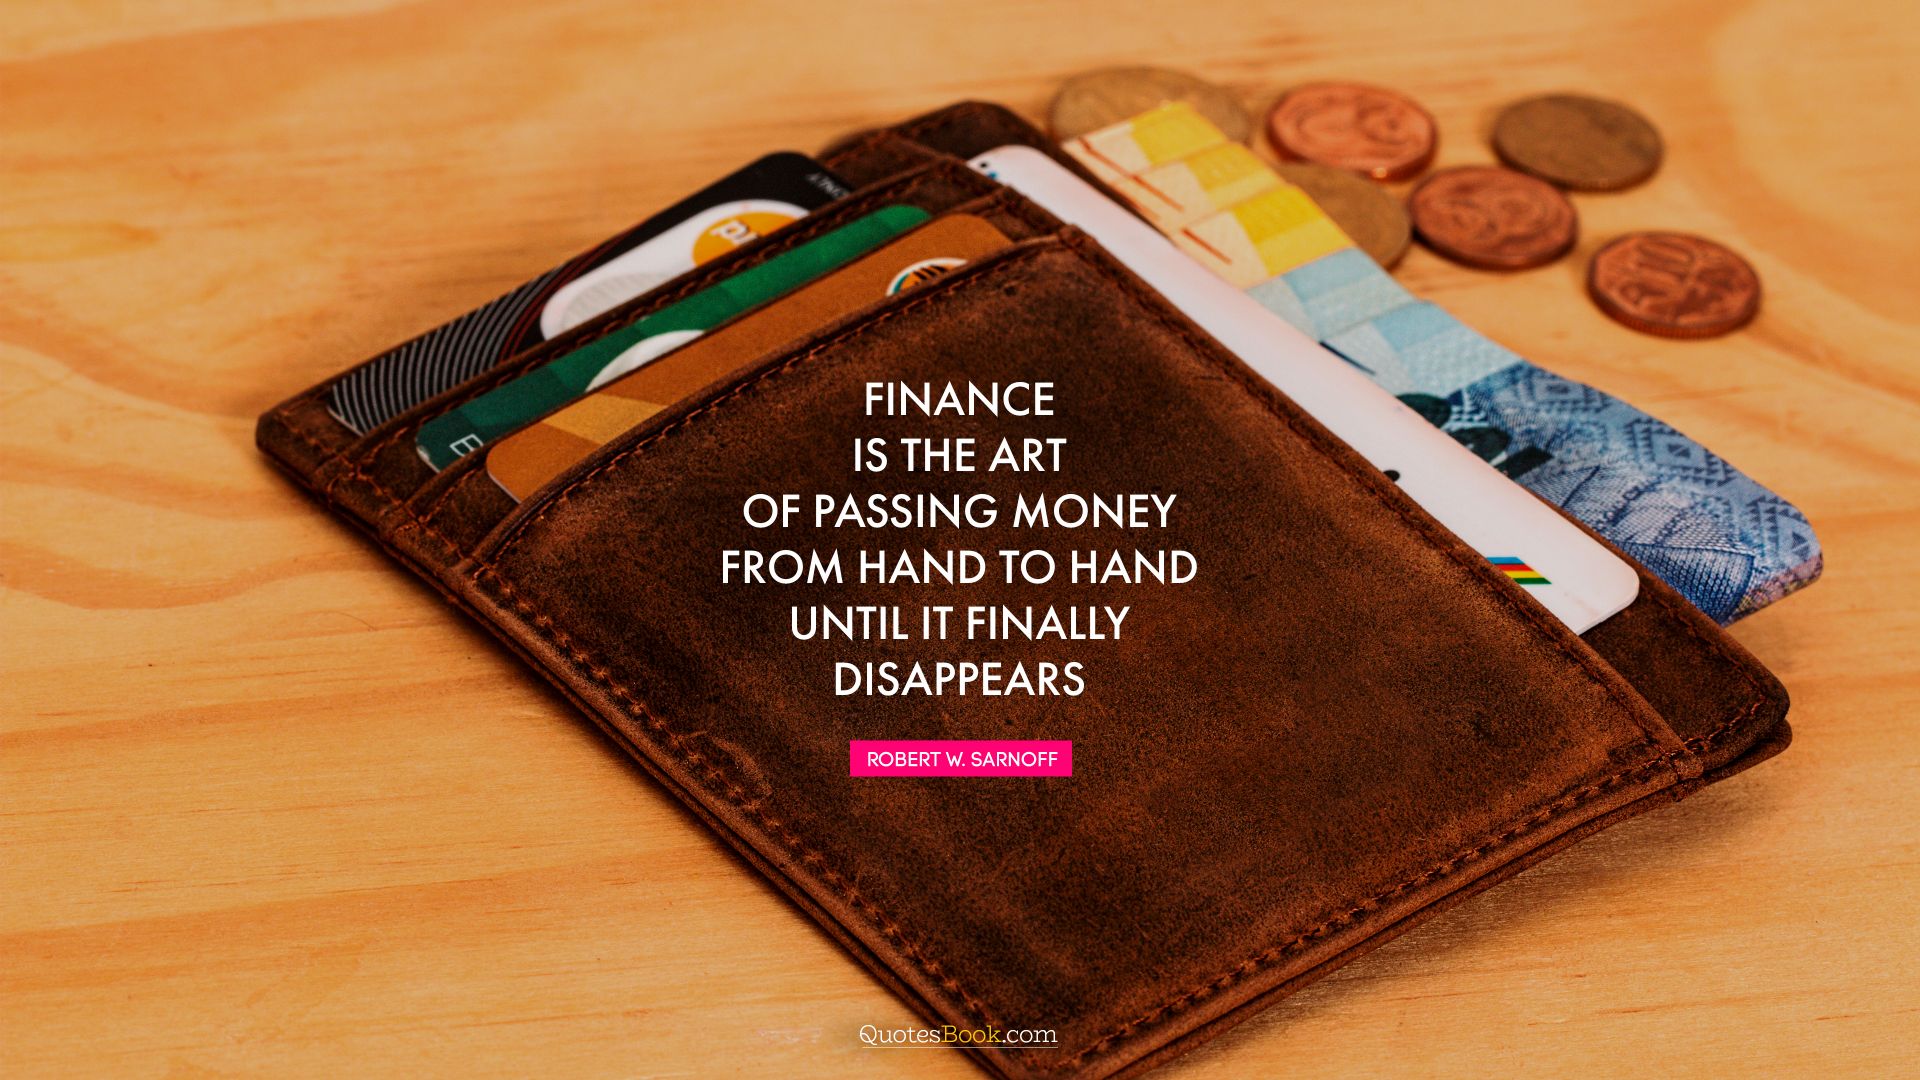 Finance is the art of passing money from hand to hand until it finally disappears. - Quote by Robert W. Sarnoff